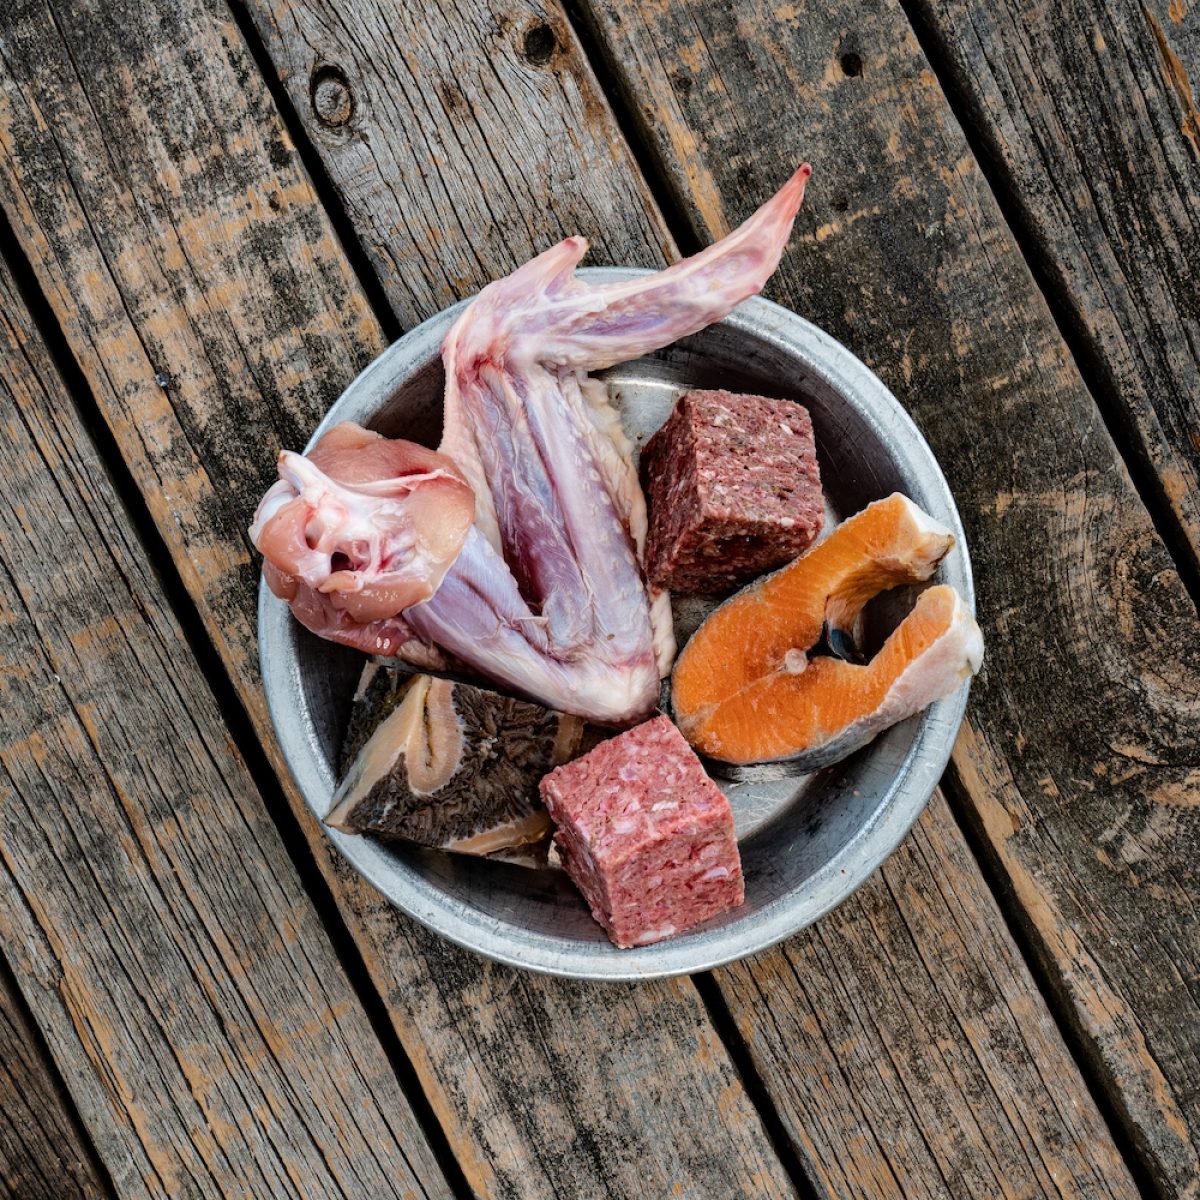 Assortment of Raw Essentials Ingredients Including, Salmon Fillet, Cubed Beef And Tripe, Turkey Wing and Cubed Wallaby Mixed Meat In Metal Pet Bowl